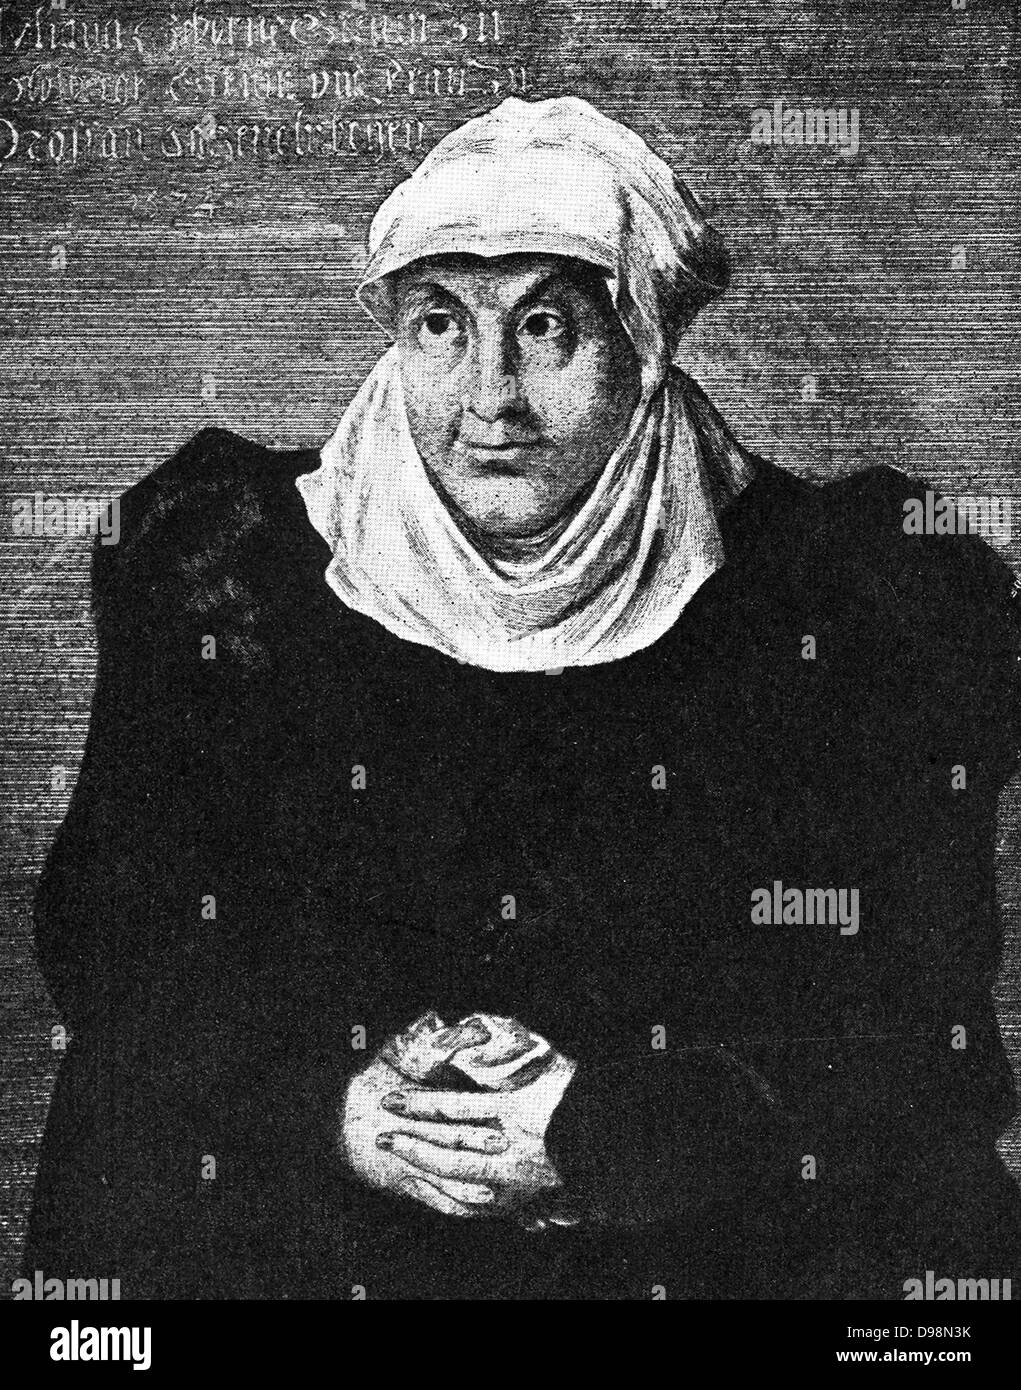 Juliana van Stolberg (1506-1580) mother of Prince William I.  reproduction of an engraving by W Steelink. Stock Photo